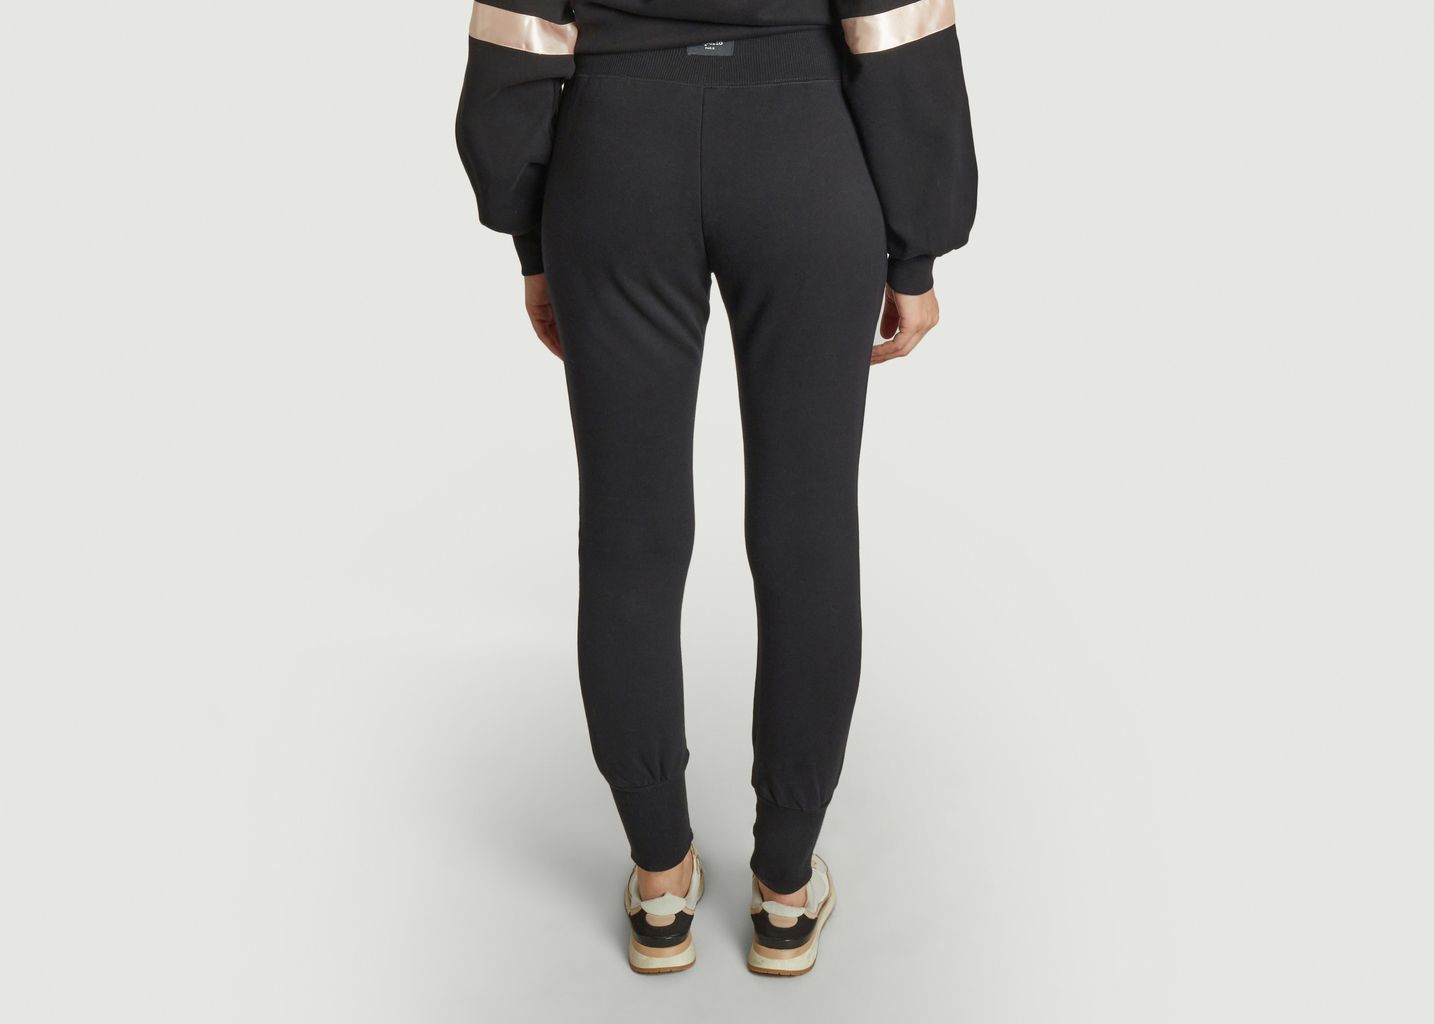 French Terry Fleece Jogging Pant - Repetto